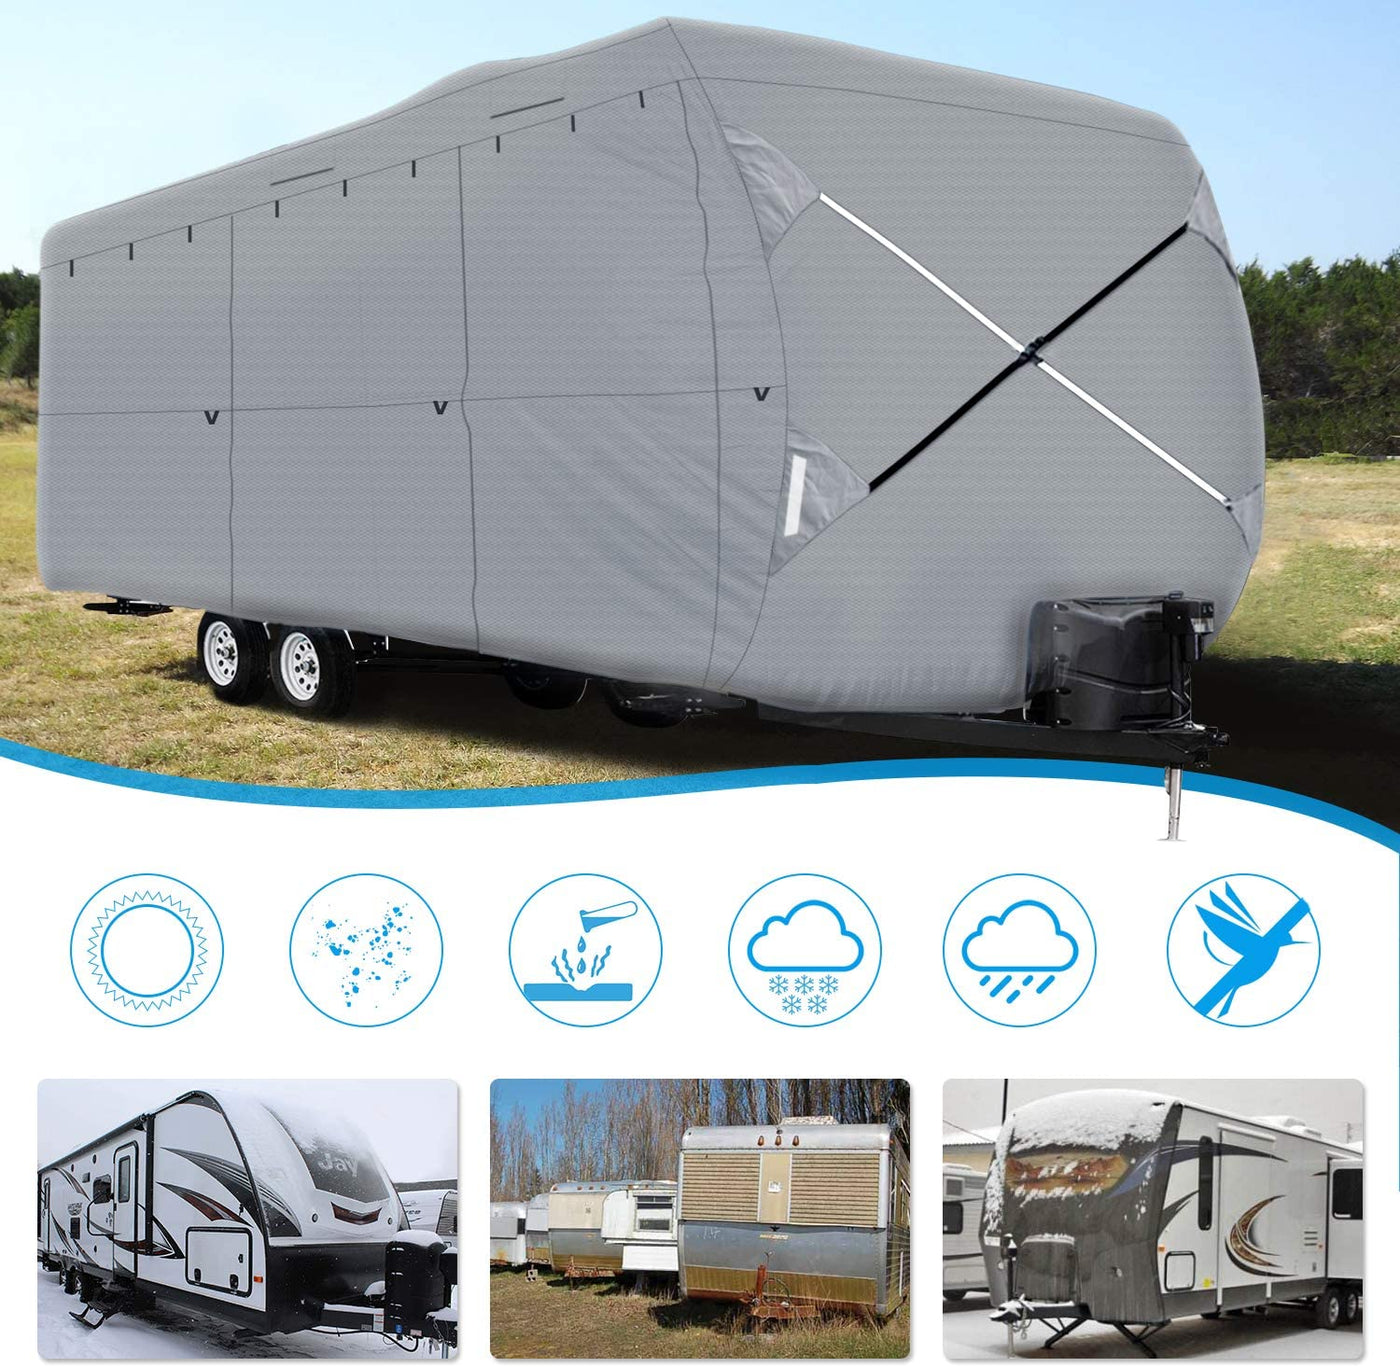 XGEAR Upgraded Thick 6-Ply Top Panel Travel Trailer Cover for 30'-33'- $150